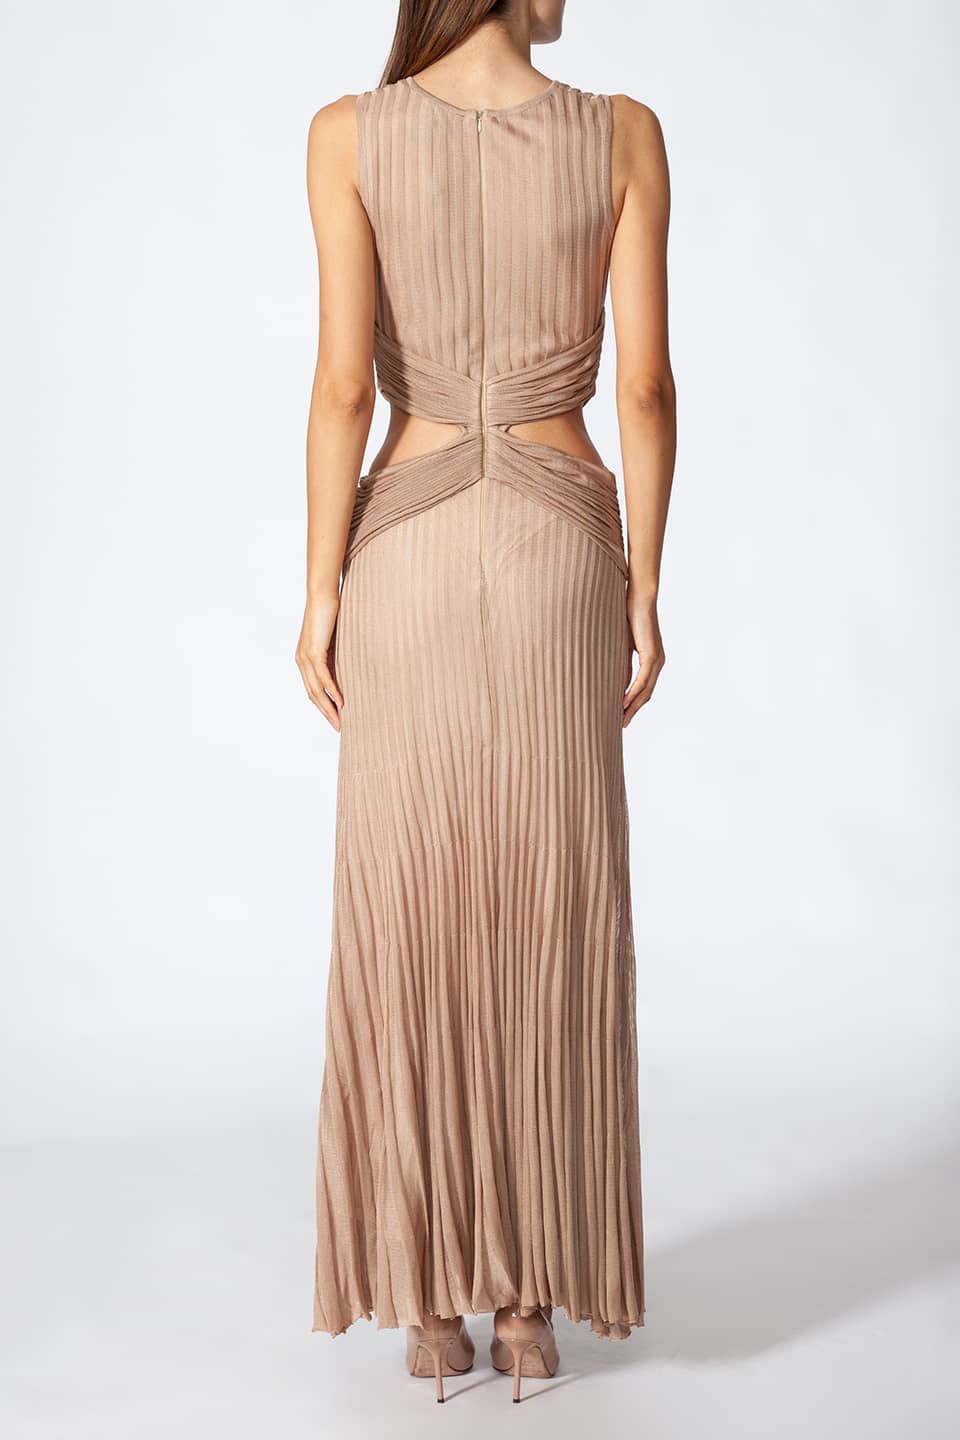 Thumbnail for Product gallery 5, Model in pose for back view, wearing Fashion Stylist Kukhareva London's elegant gold dress. Long evening dress crafted from gold viscose blend featuring round neckline.